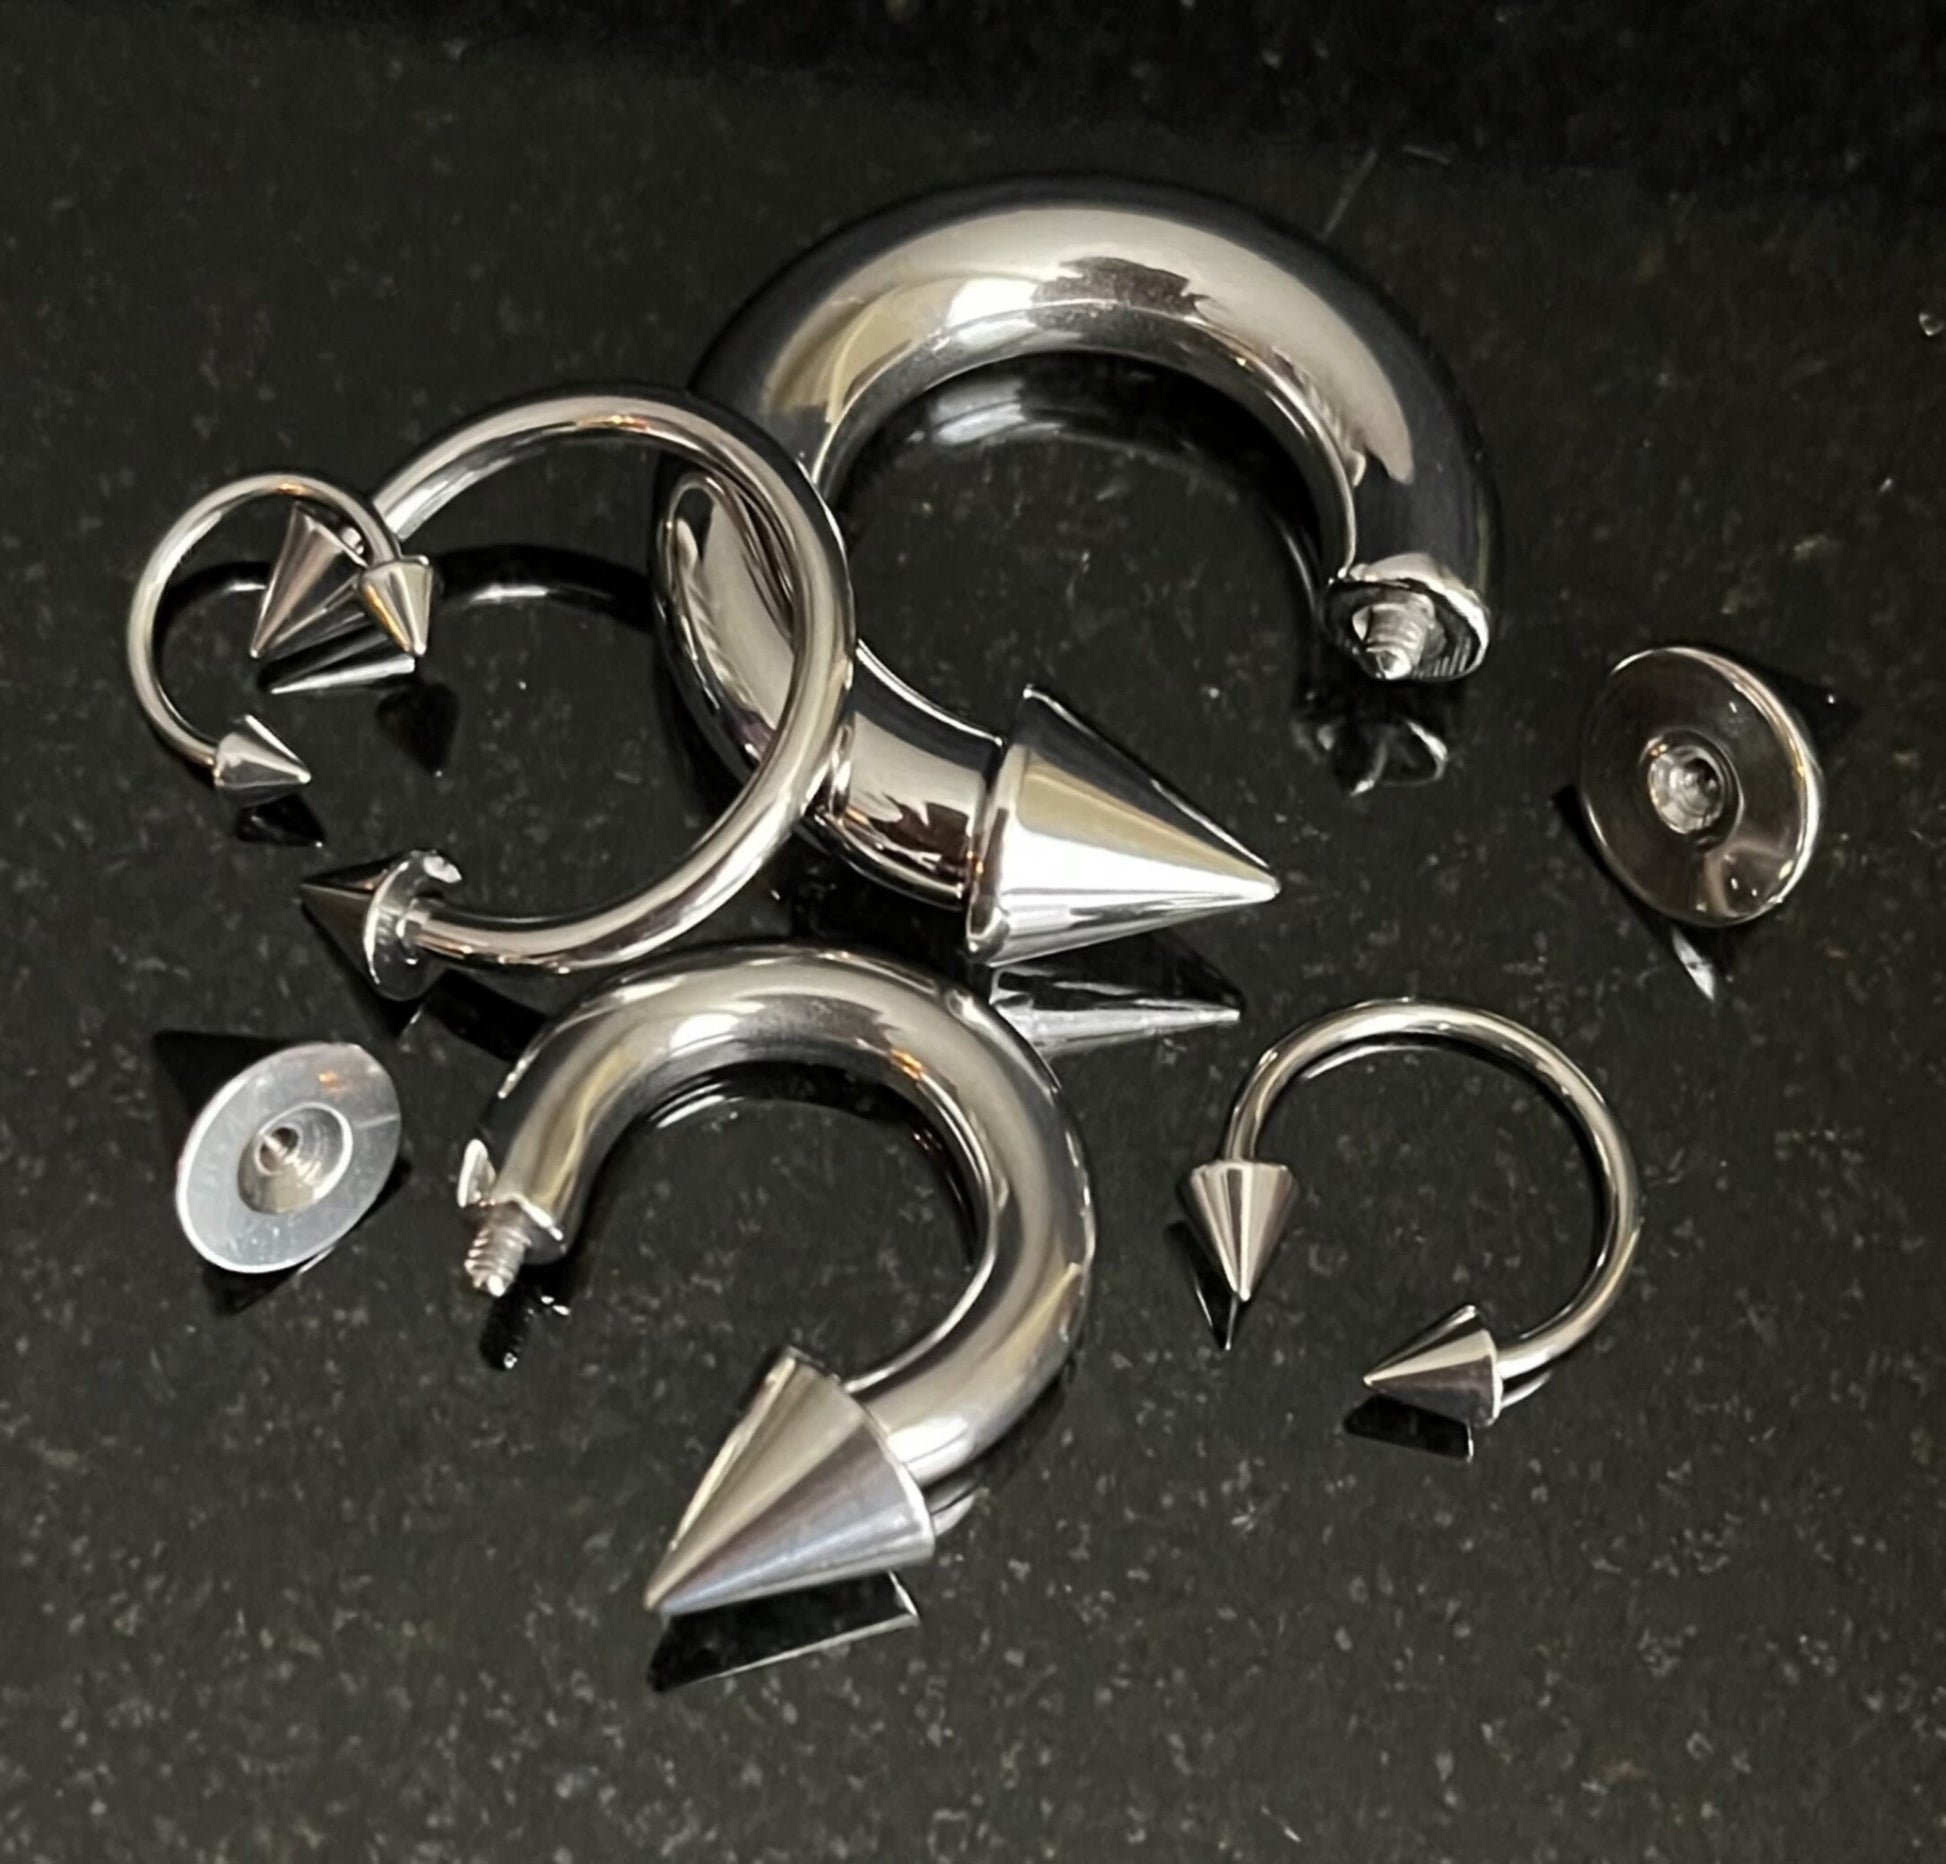 1 Piece Surgical Steel Circular Horseshoe Barbell with Spikes Ring - 18G thru 2g with Assorted Internal Diameter and Spike Size!!